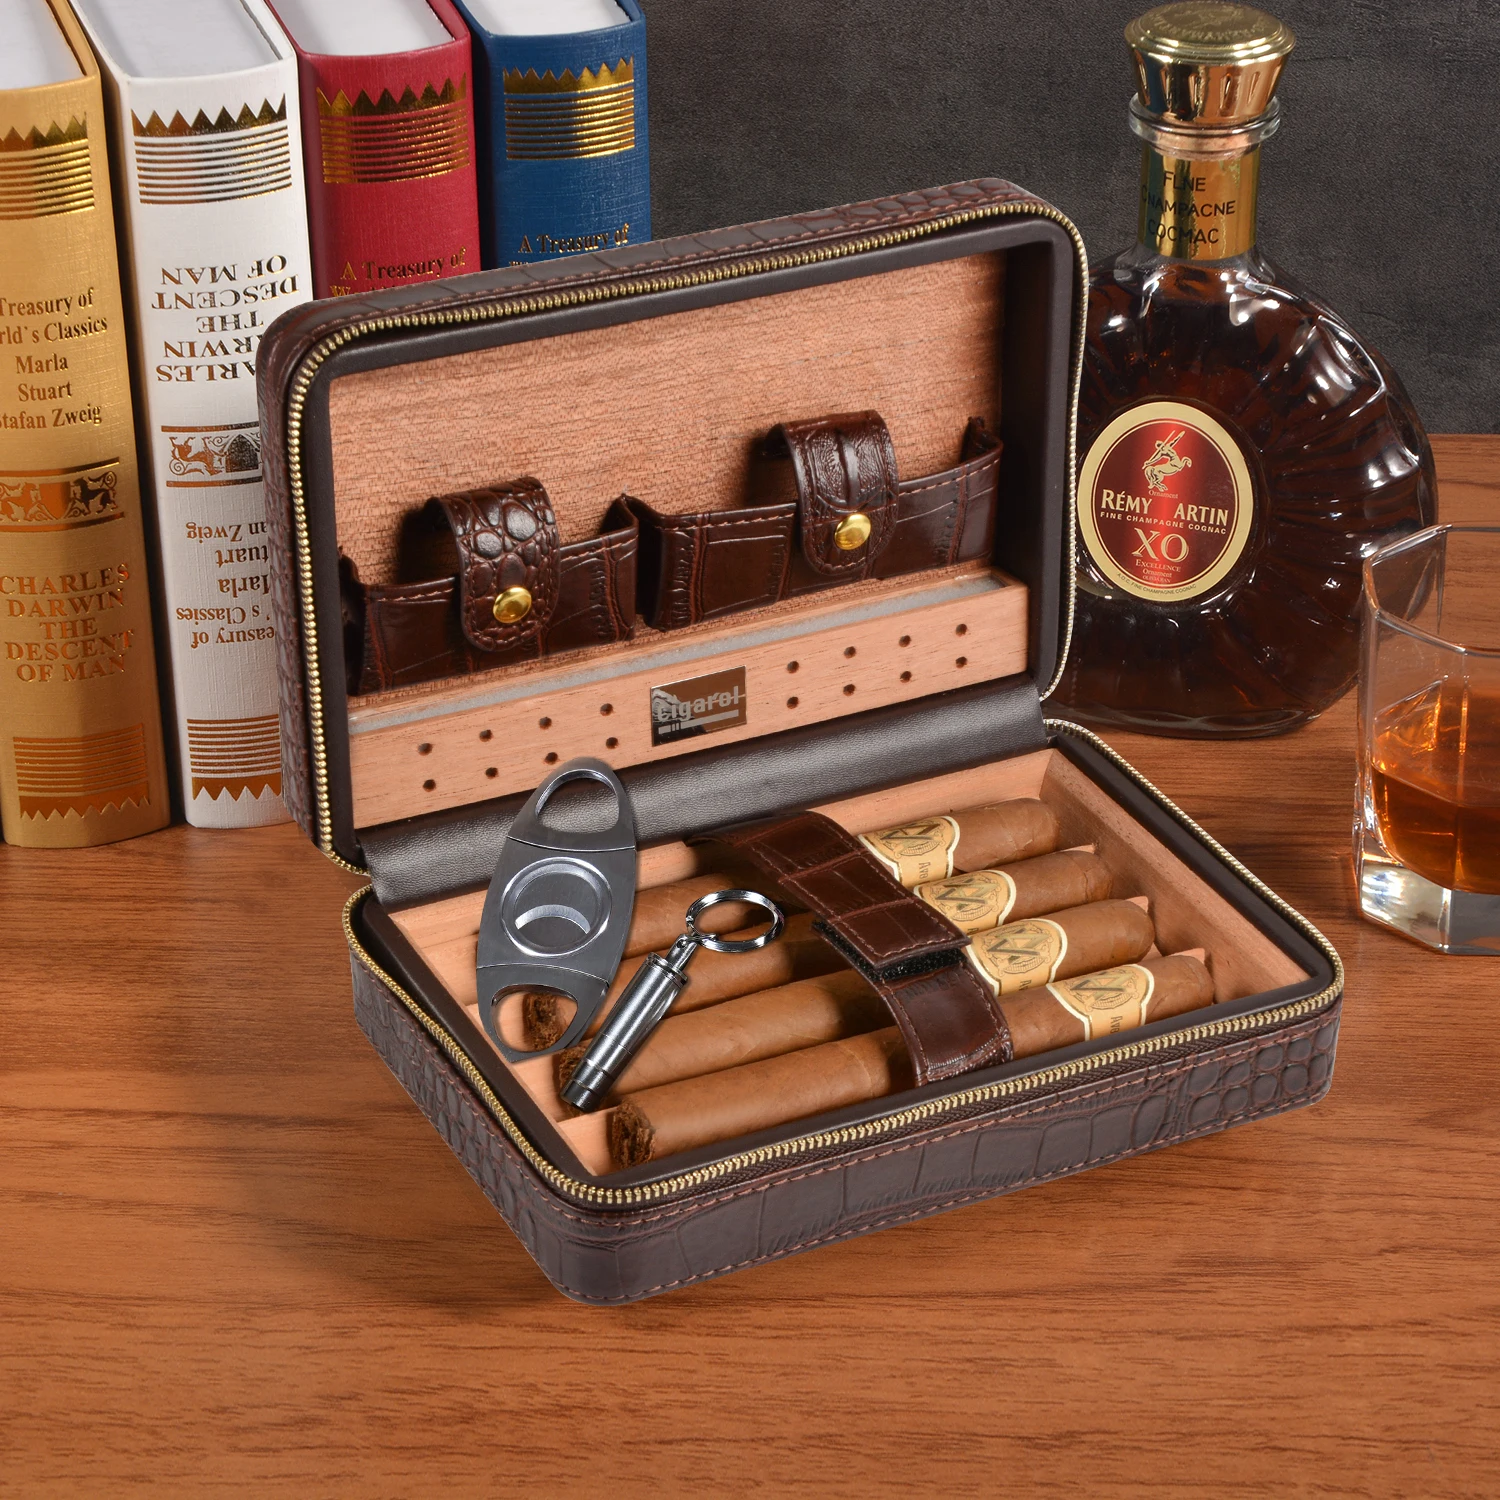 Factory Wholesale Cigar Travel Humidor Cedar Wood Leather Cigar Case with Cigar Accessories Gift Set